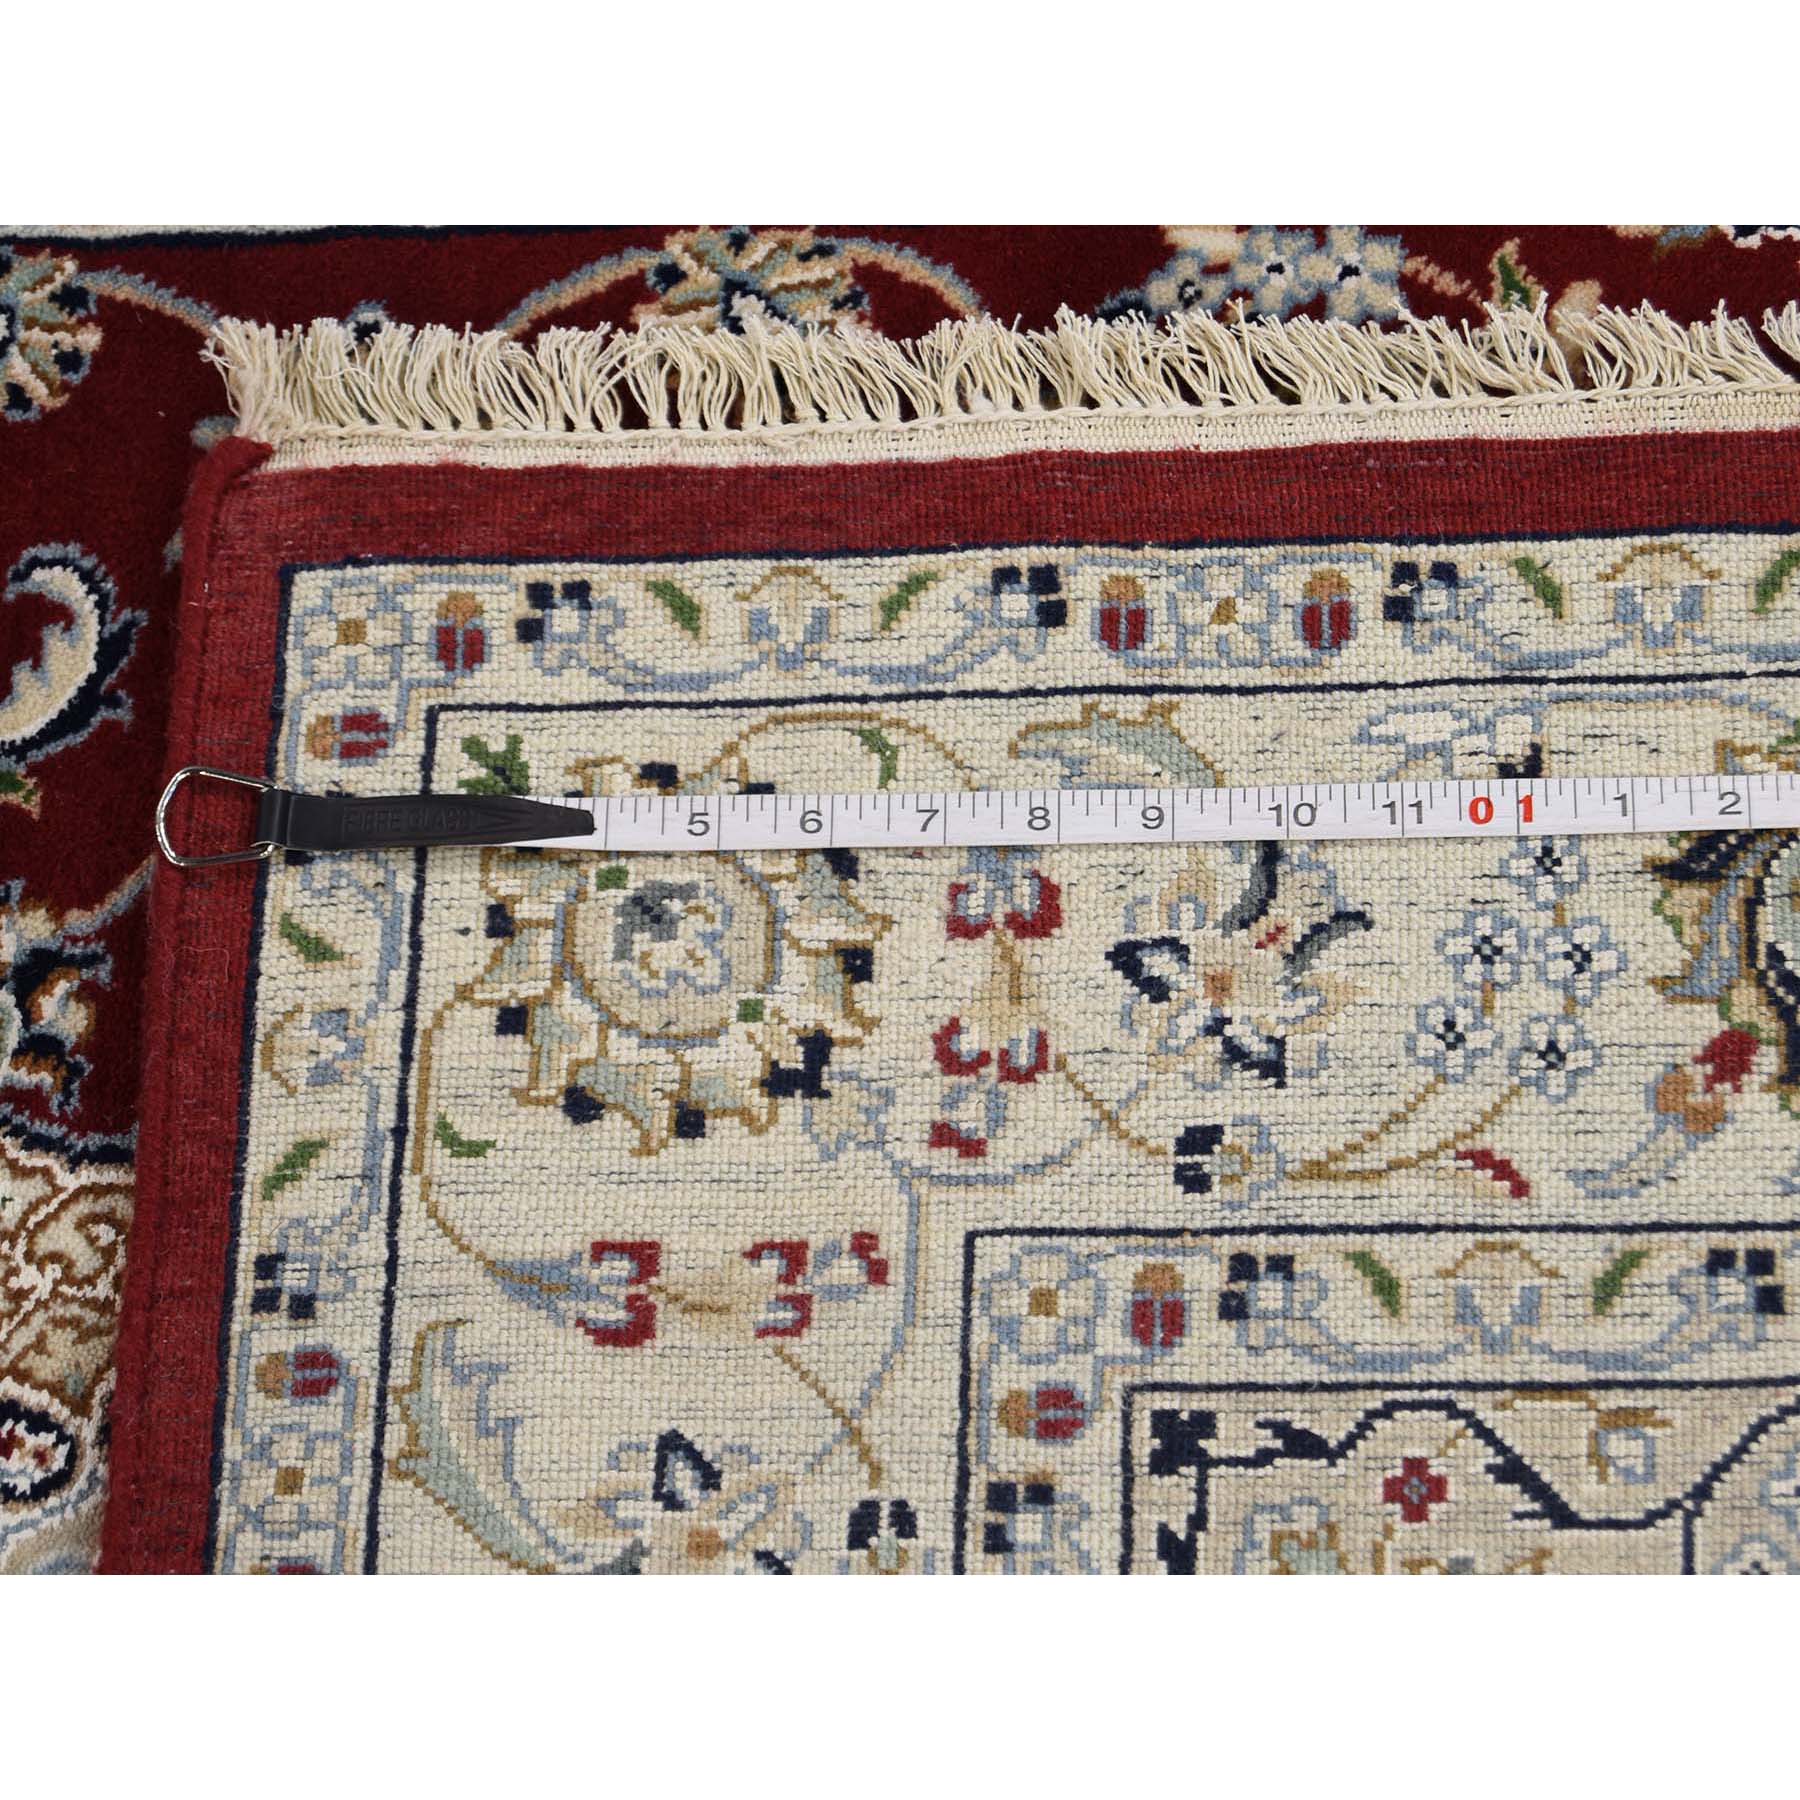 3-10 x6- 250 Kpsi Red Nain Wool and Silk Hand-Knotted Oriental Rug 